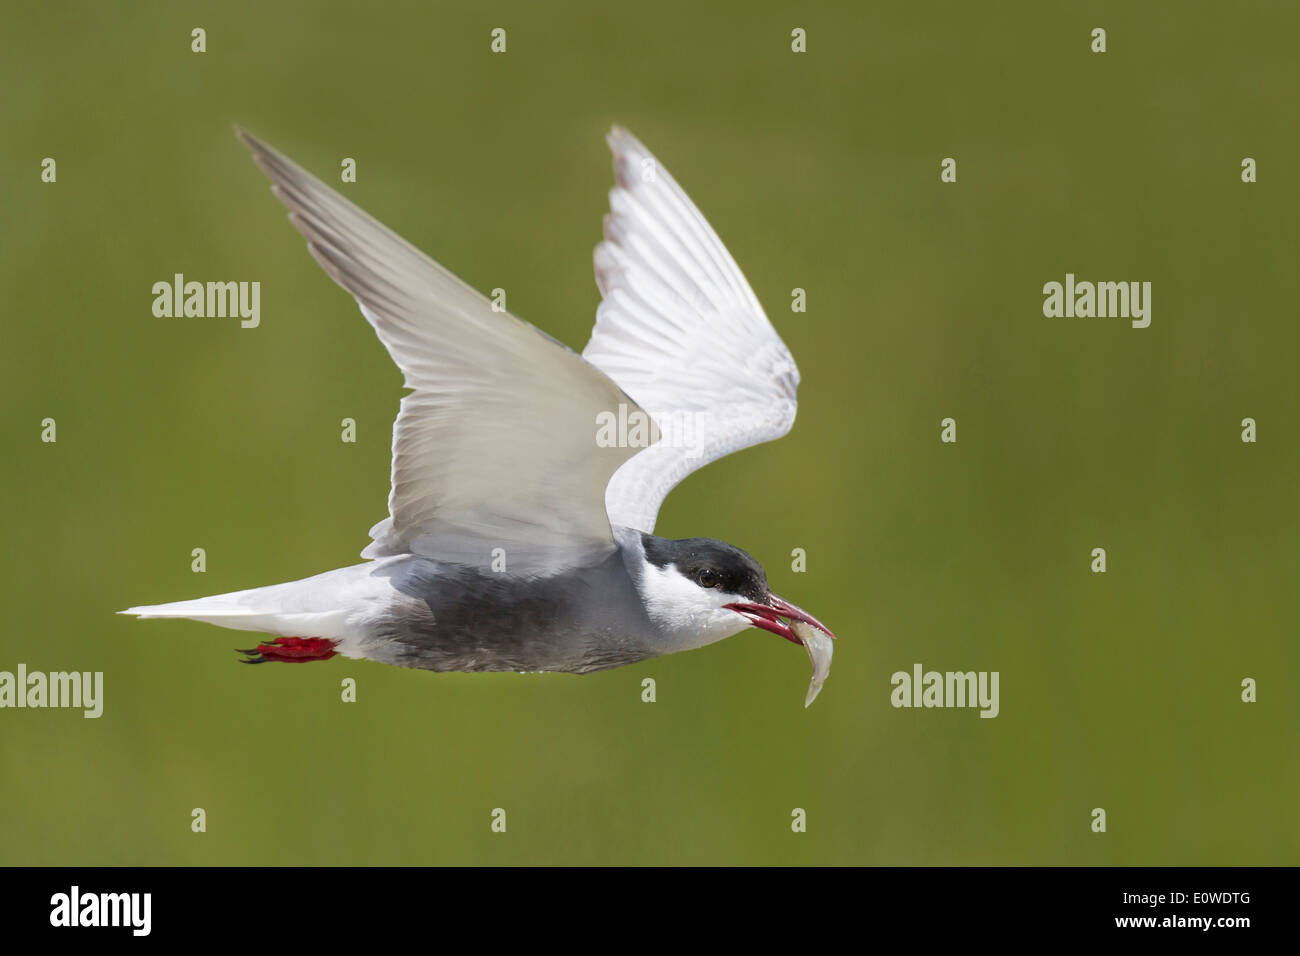 Whiskered Tern (Chlidonias hybrida) in flight, with little fish in its beak. Germany Stock Photo